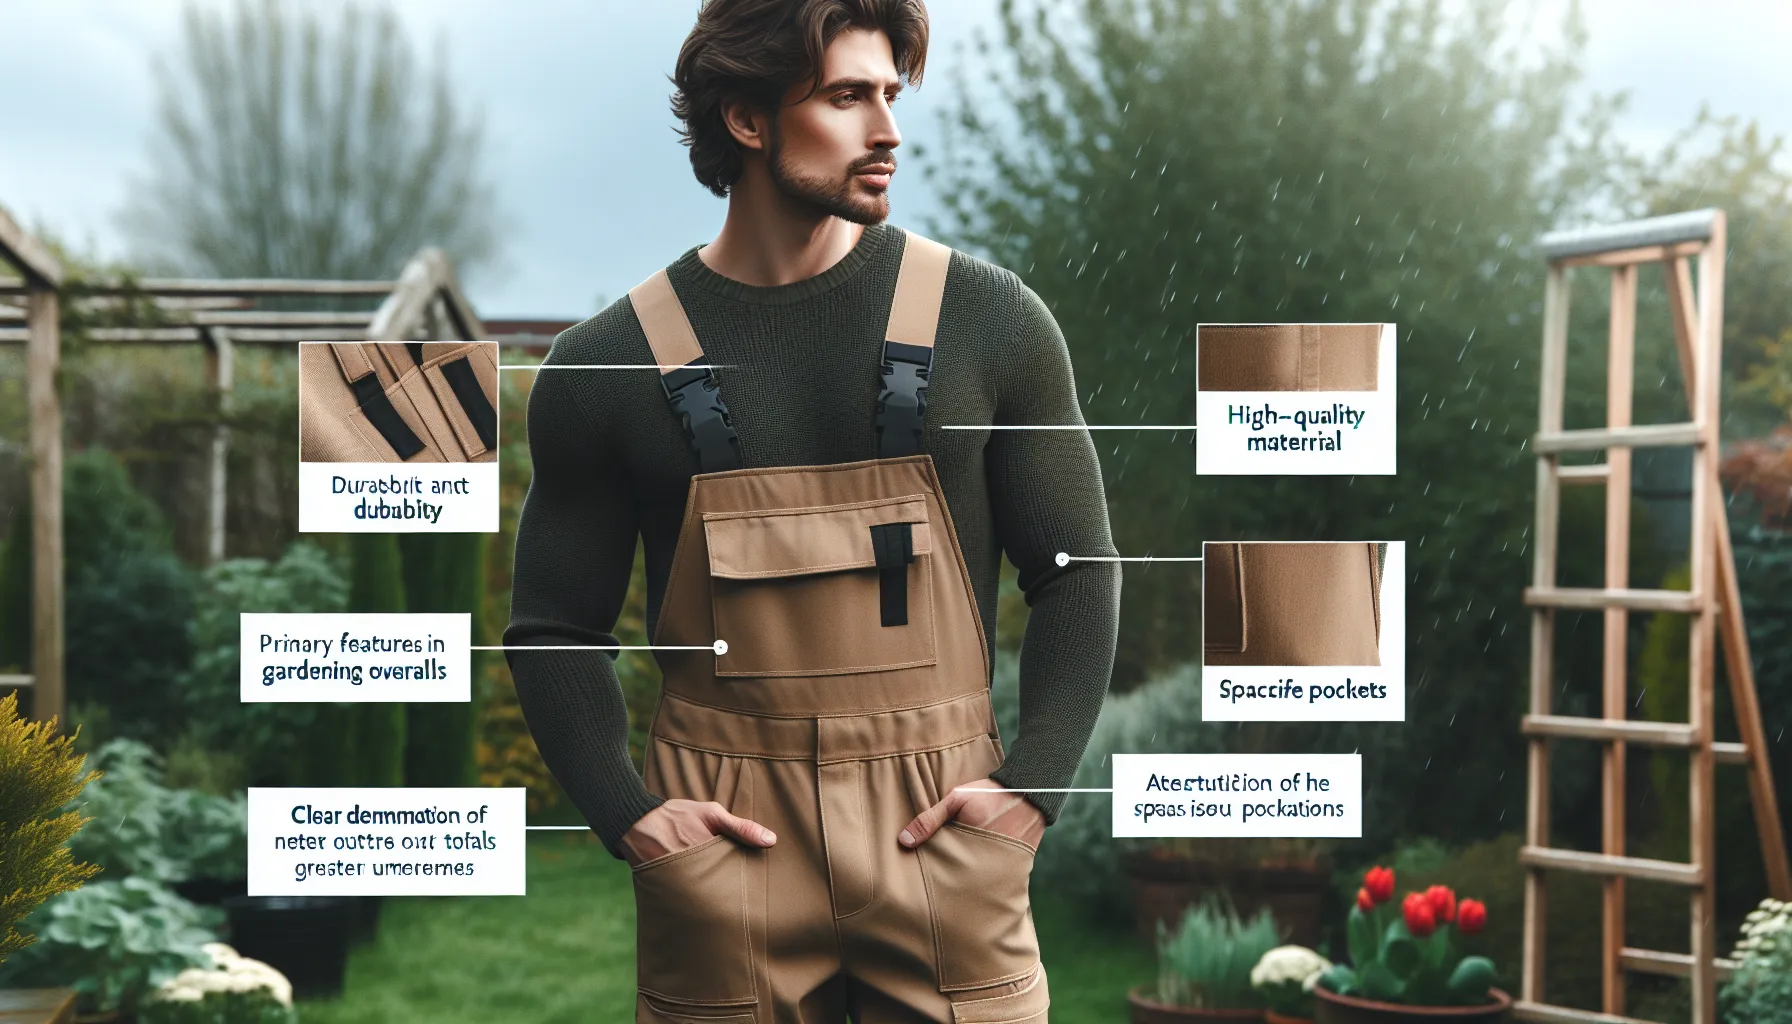 A person stands in a garden wearing brown gardening overalls with various feature labels pointing to the durability, material quality, and pocket details.